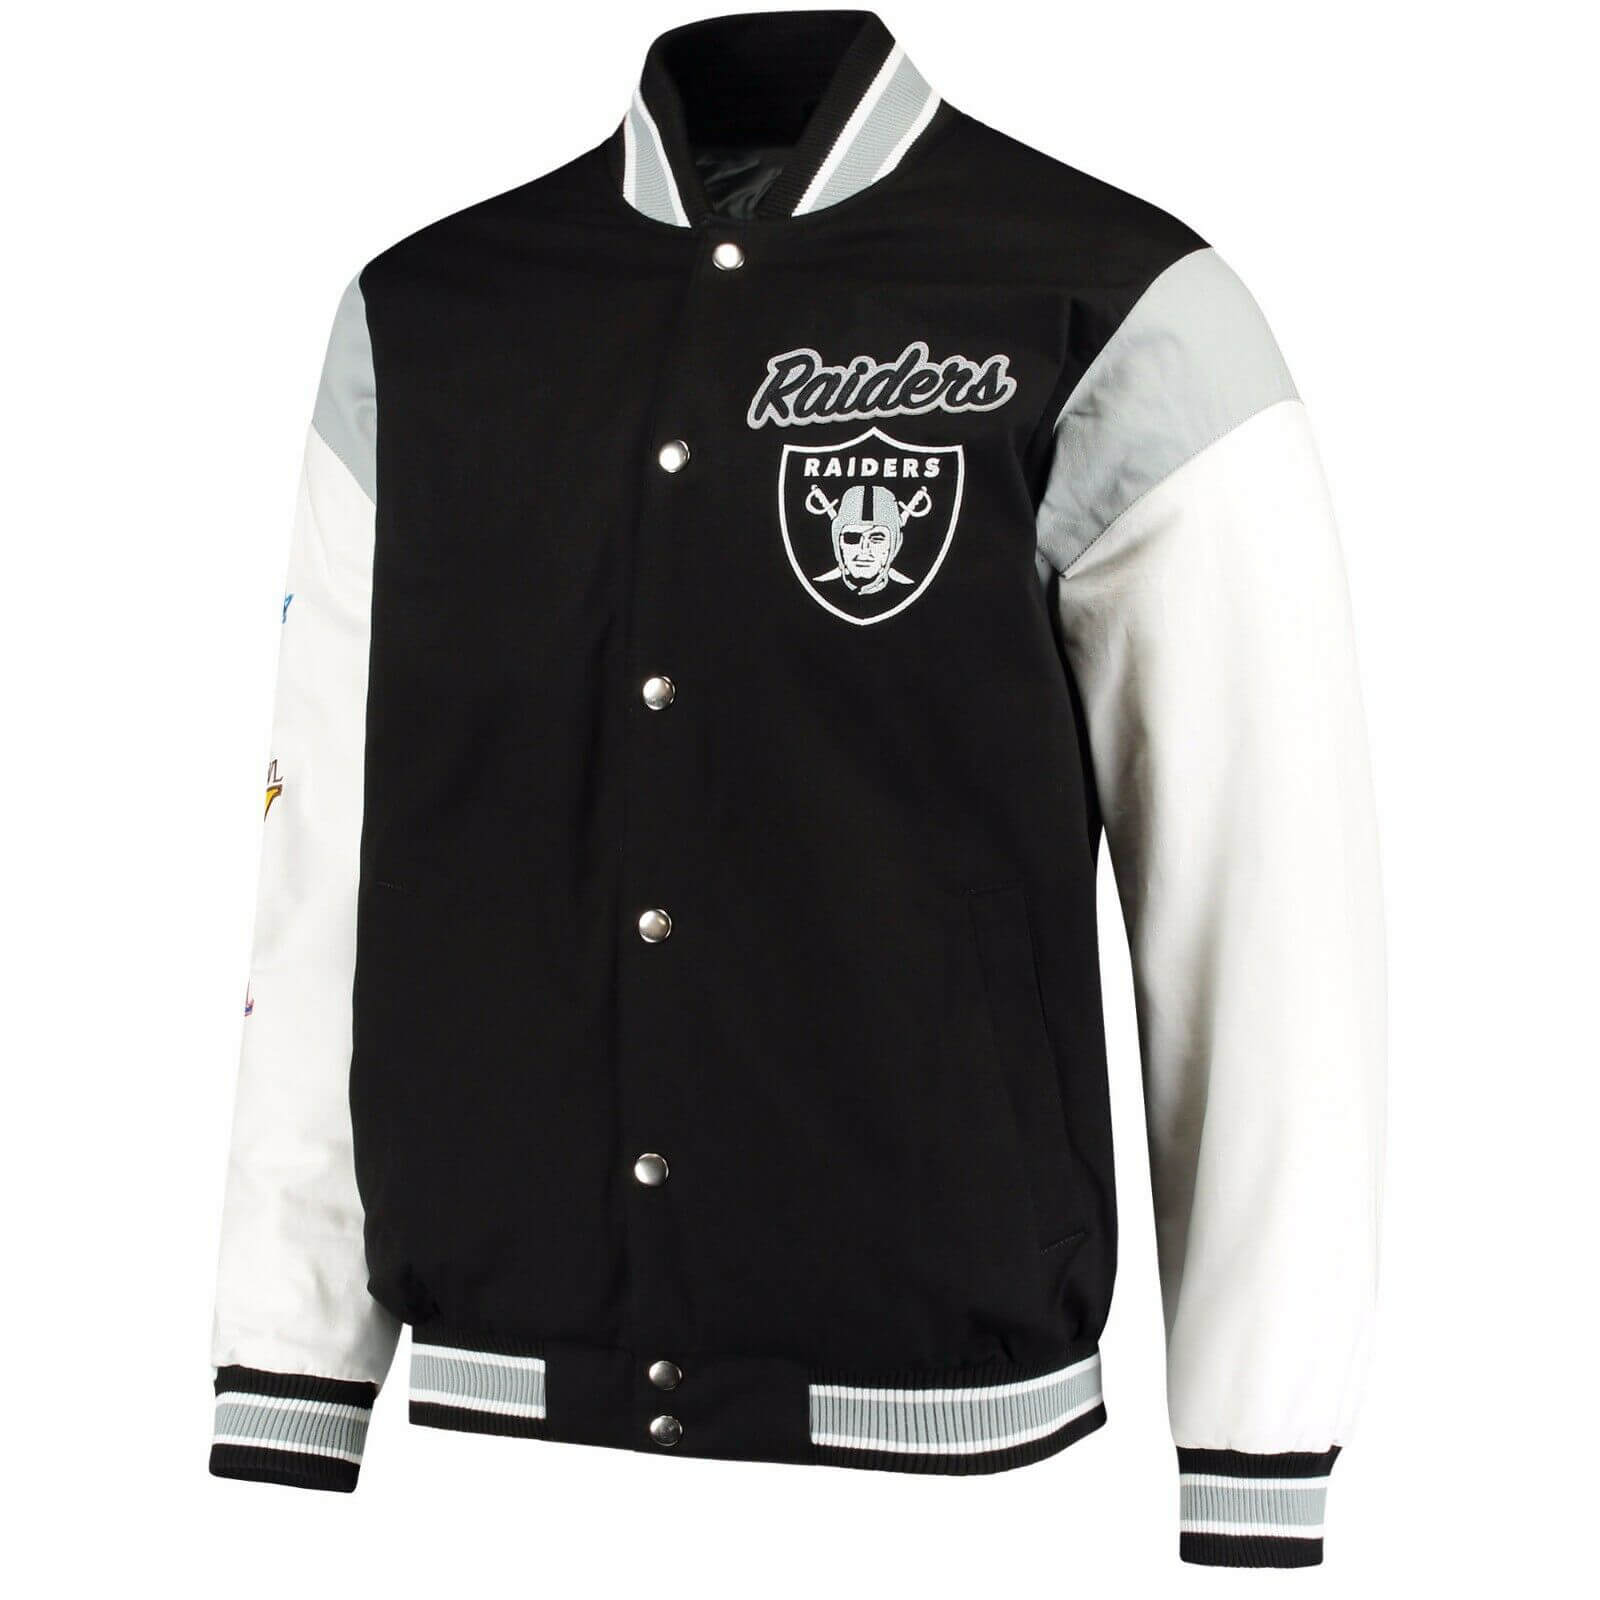 Official NFL Raiders Super Bowl Championship Leather Bomber Jacket